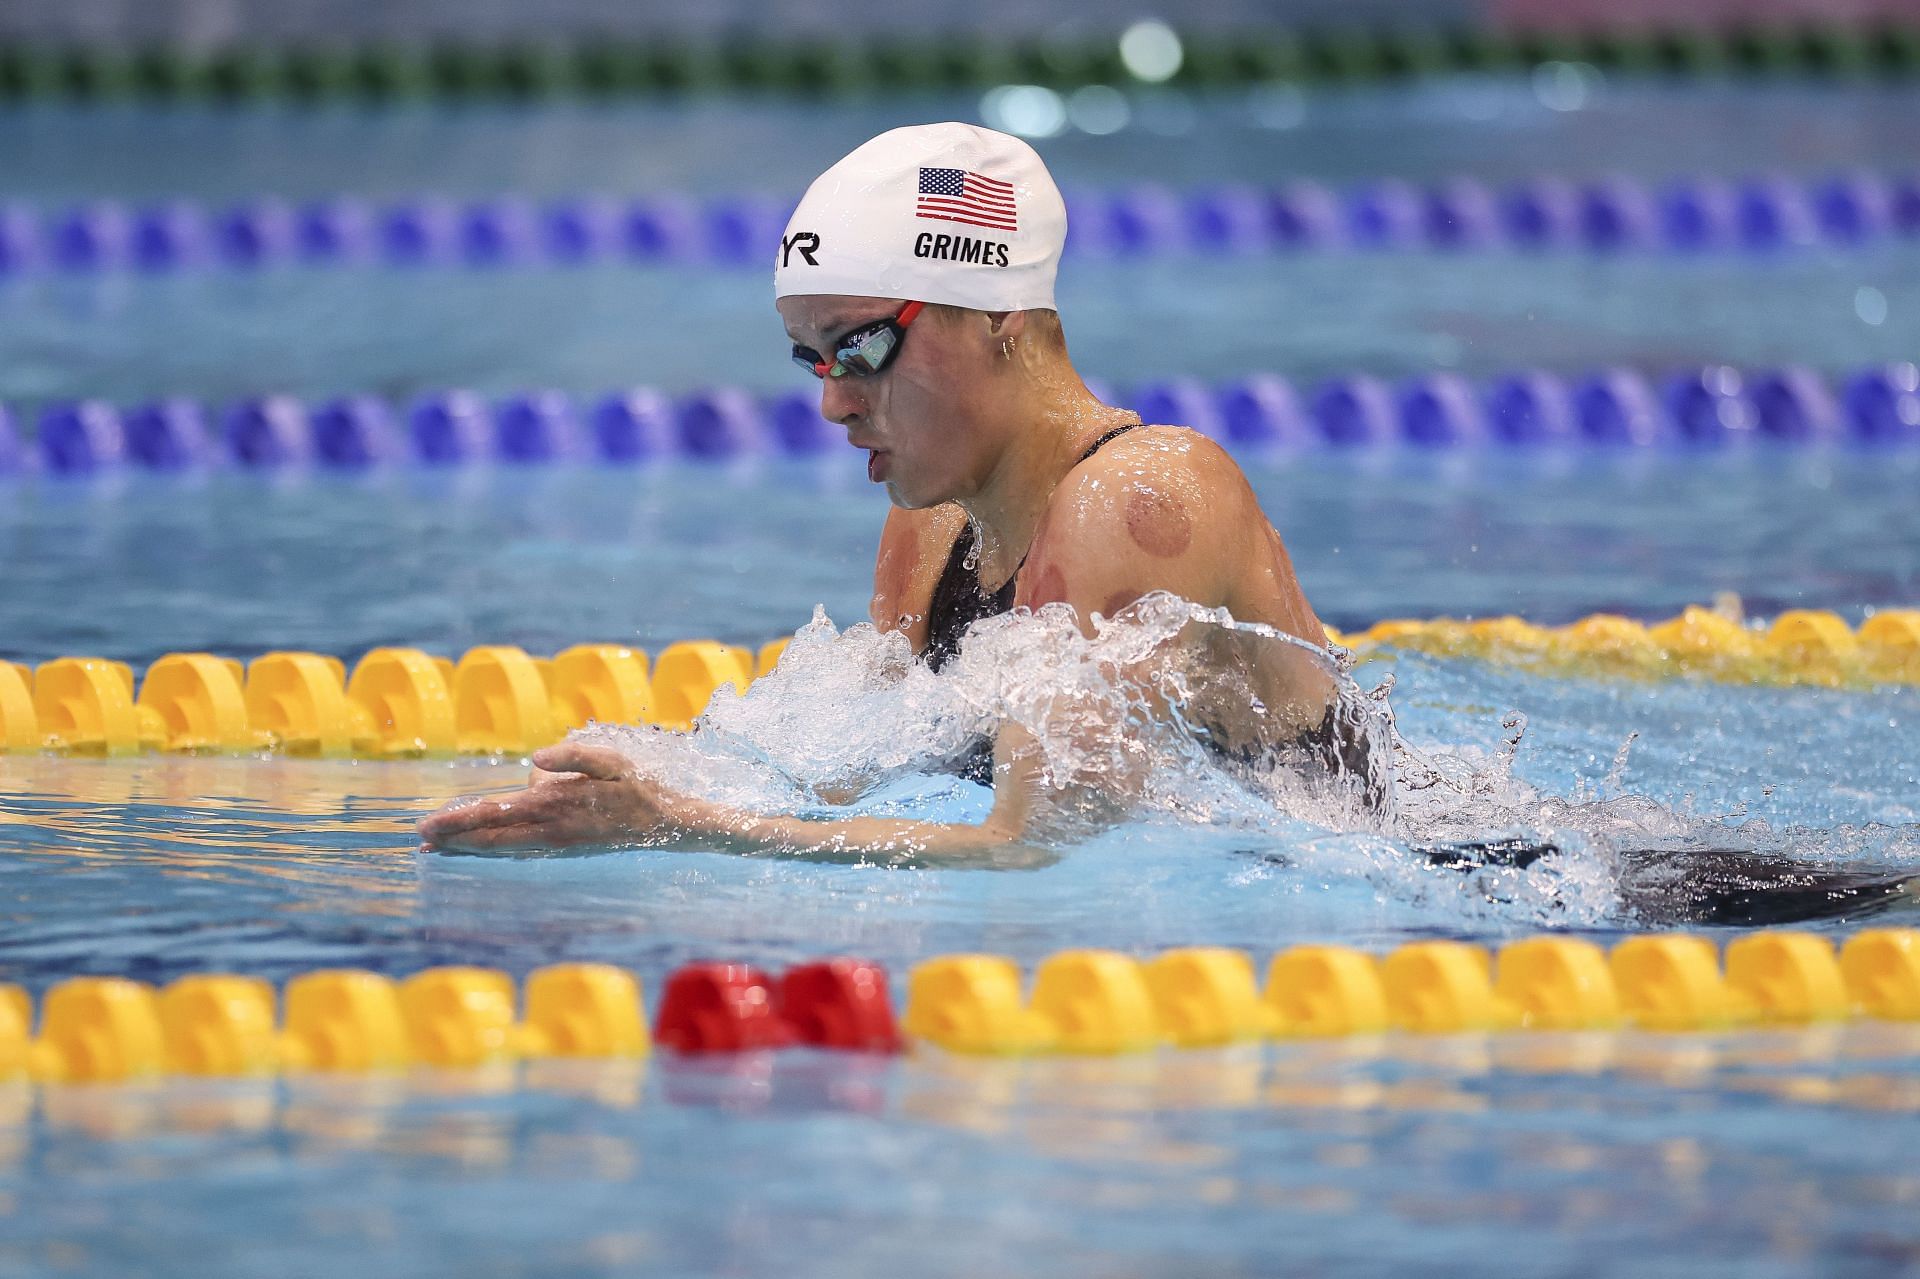 USA swimmer Katie Grimes during a training session. (PC: Getty Images)